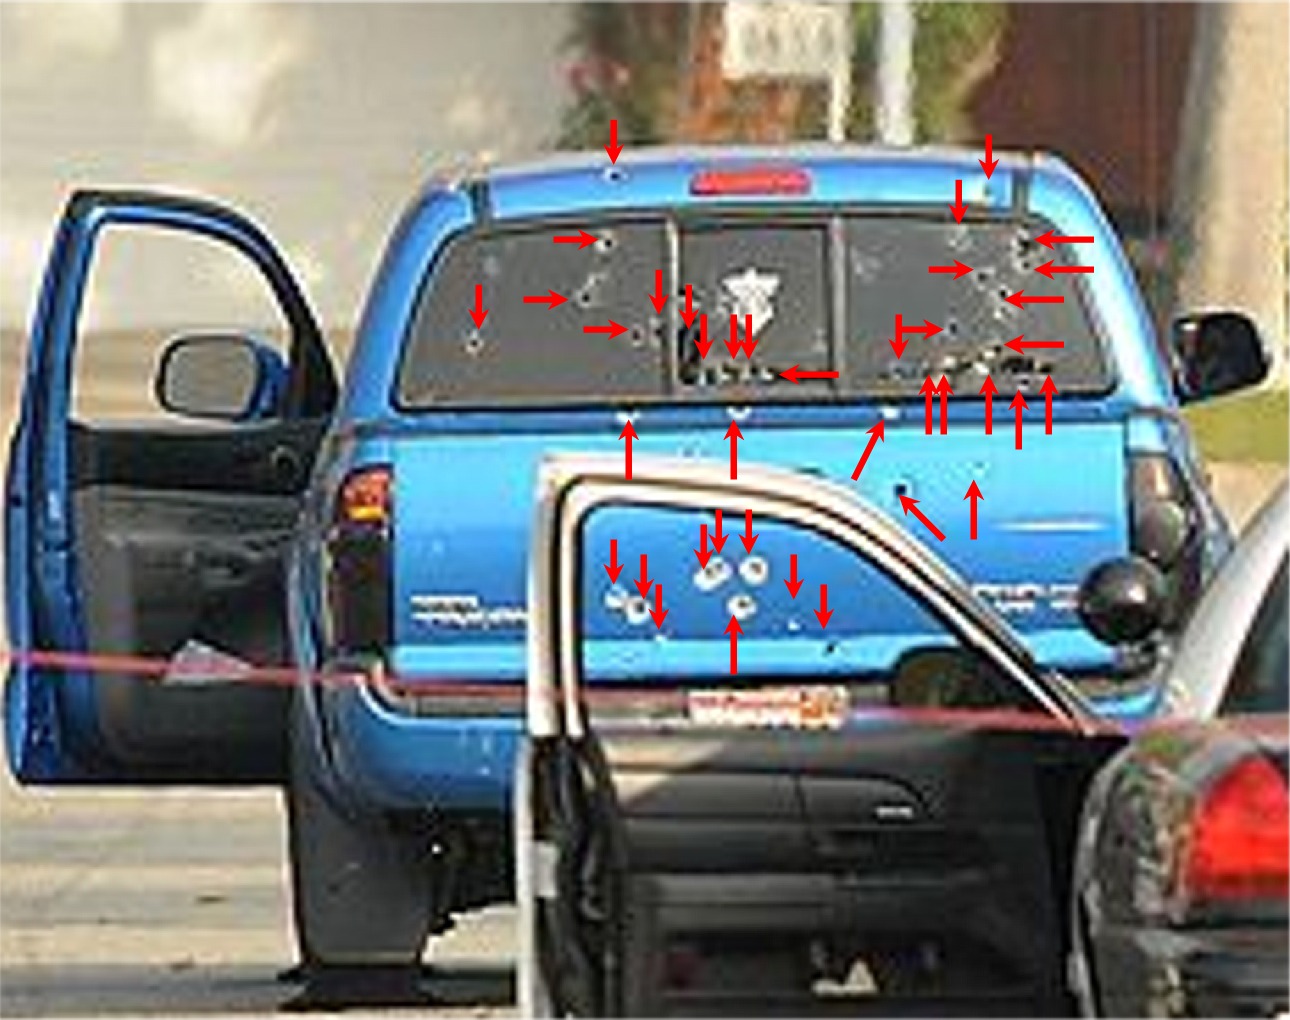 Two women shot delivering newspapers, I count 39 bullet holes, attempted murder by L.A. cops? They also shot up a 2nd look alike truck. Maybe Dorner is right after all?